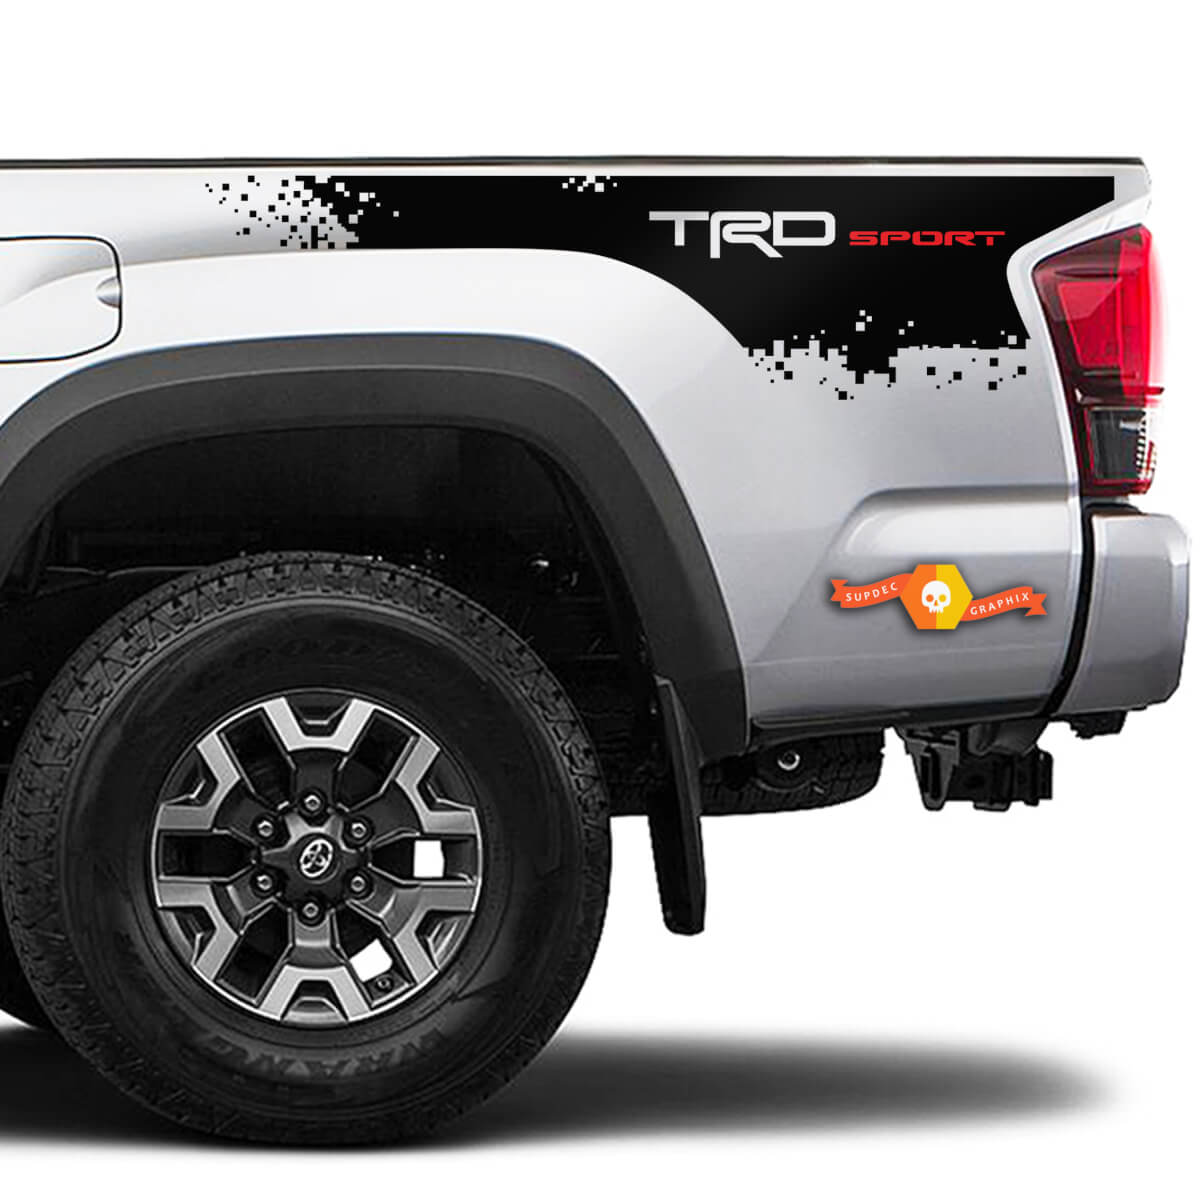 2 Toyota Tacoma 2016-2022+ TRD Sport Destroyed Bed Side Bed Stripes Vinyl Stickers Decal for Toyota Tacoma